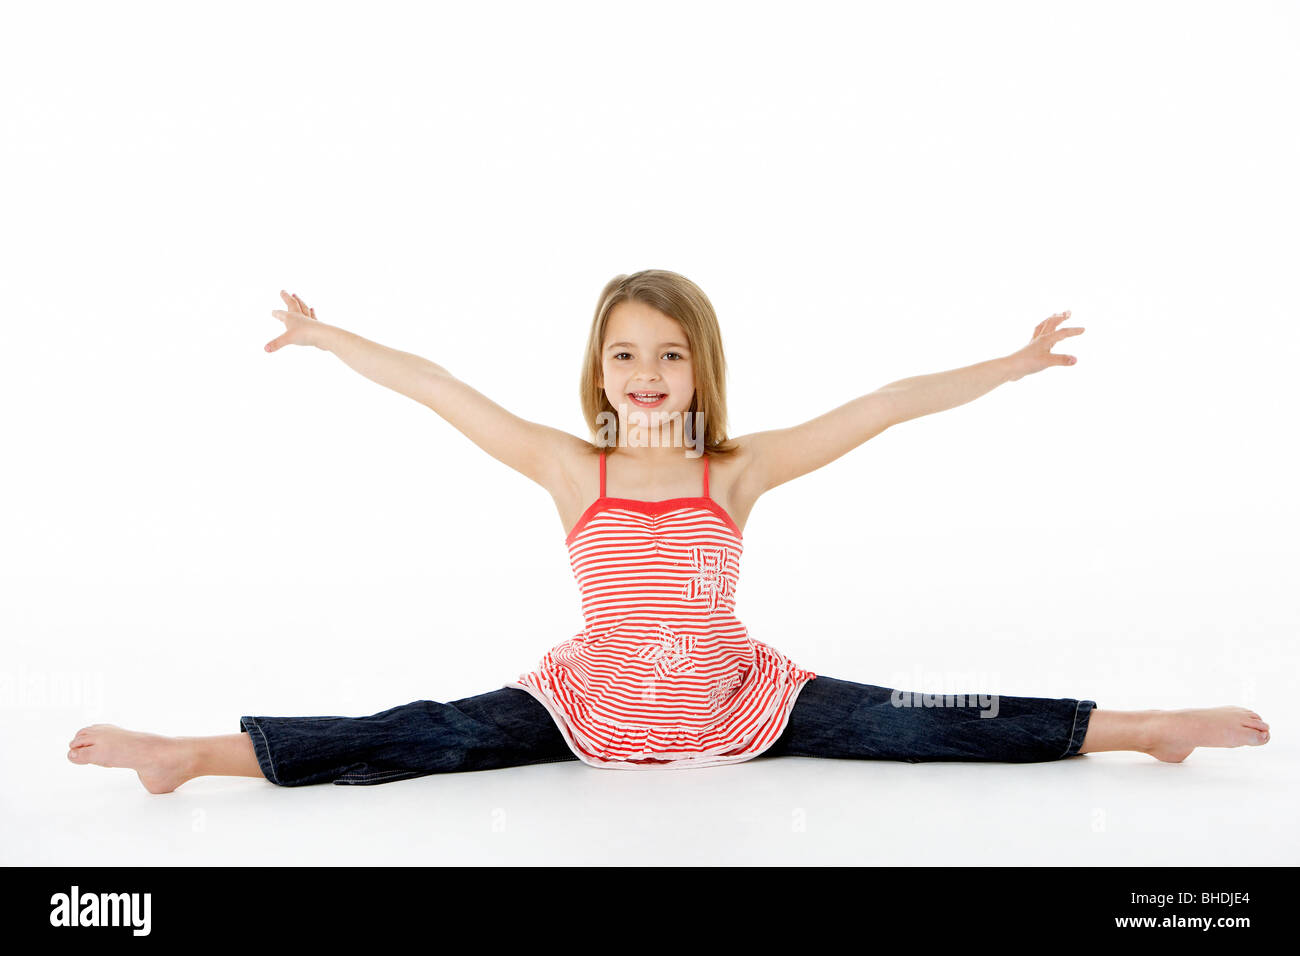 Young Girl In Gymnastic Pose Doing Splits Stock Photo